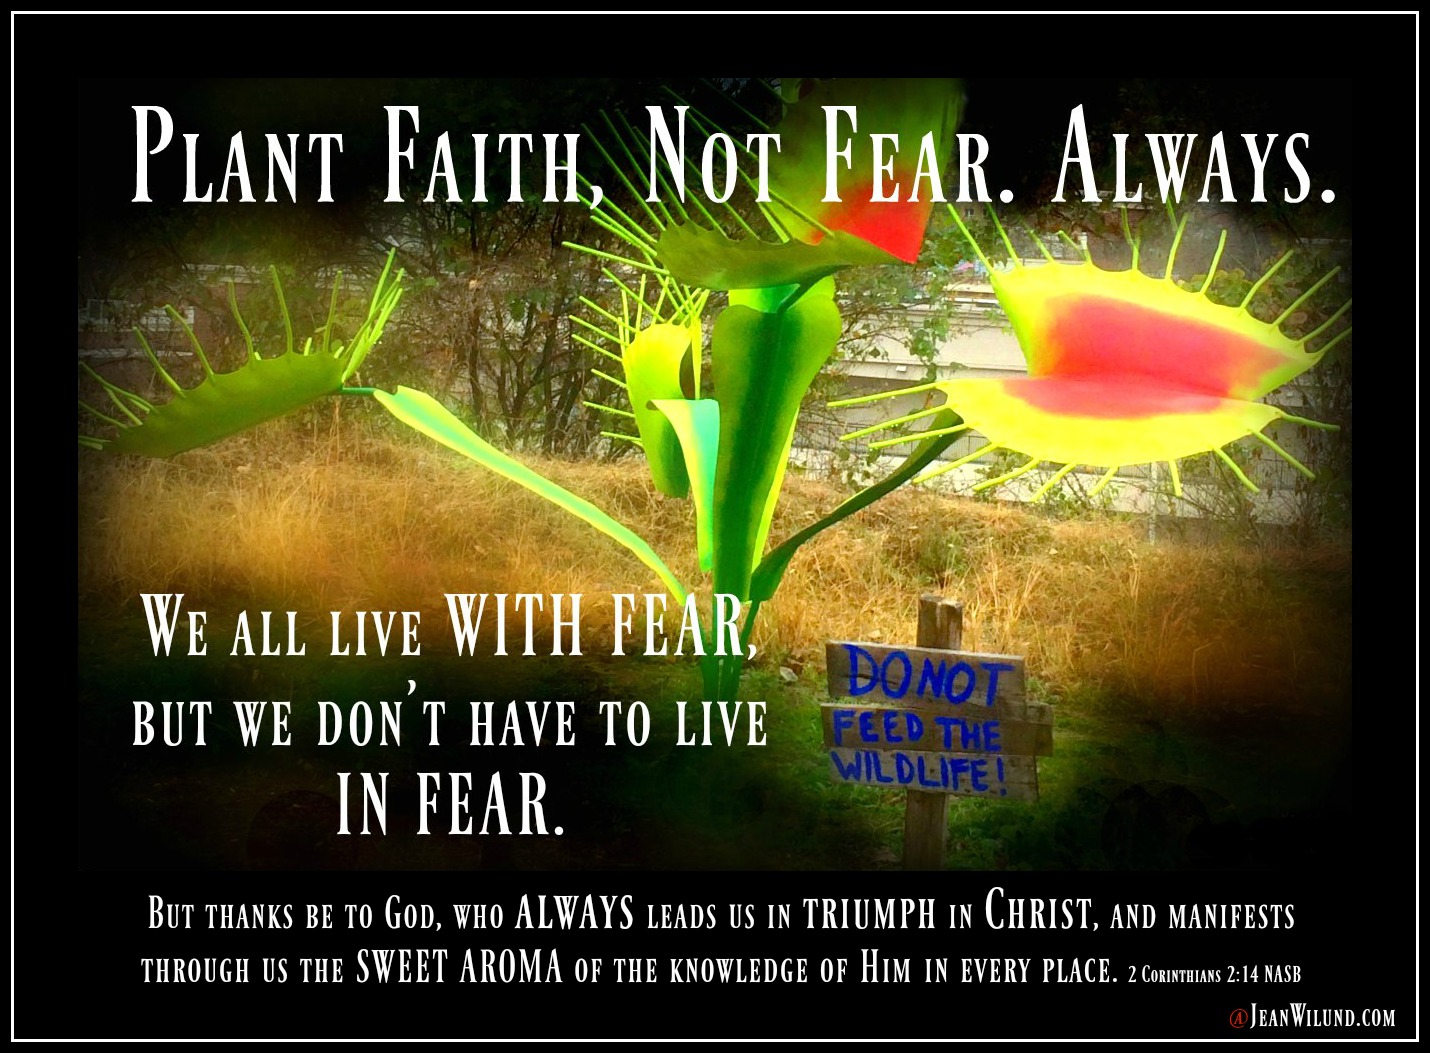 We all have to live WITH fear, but we don't have to live IN fear. Plant Faith, Not Fear. Always. via www.JeanWilund.com